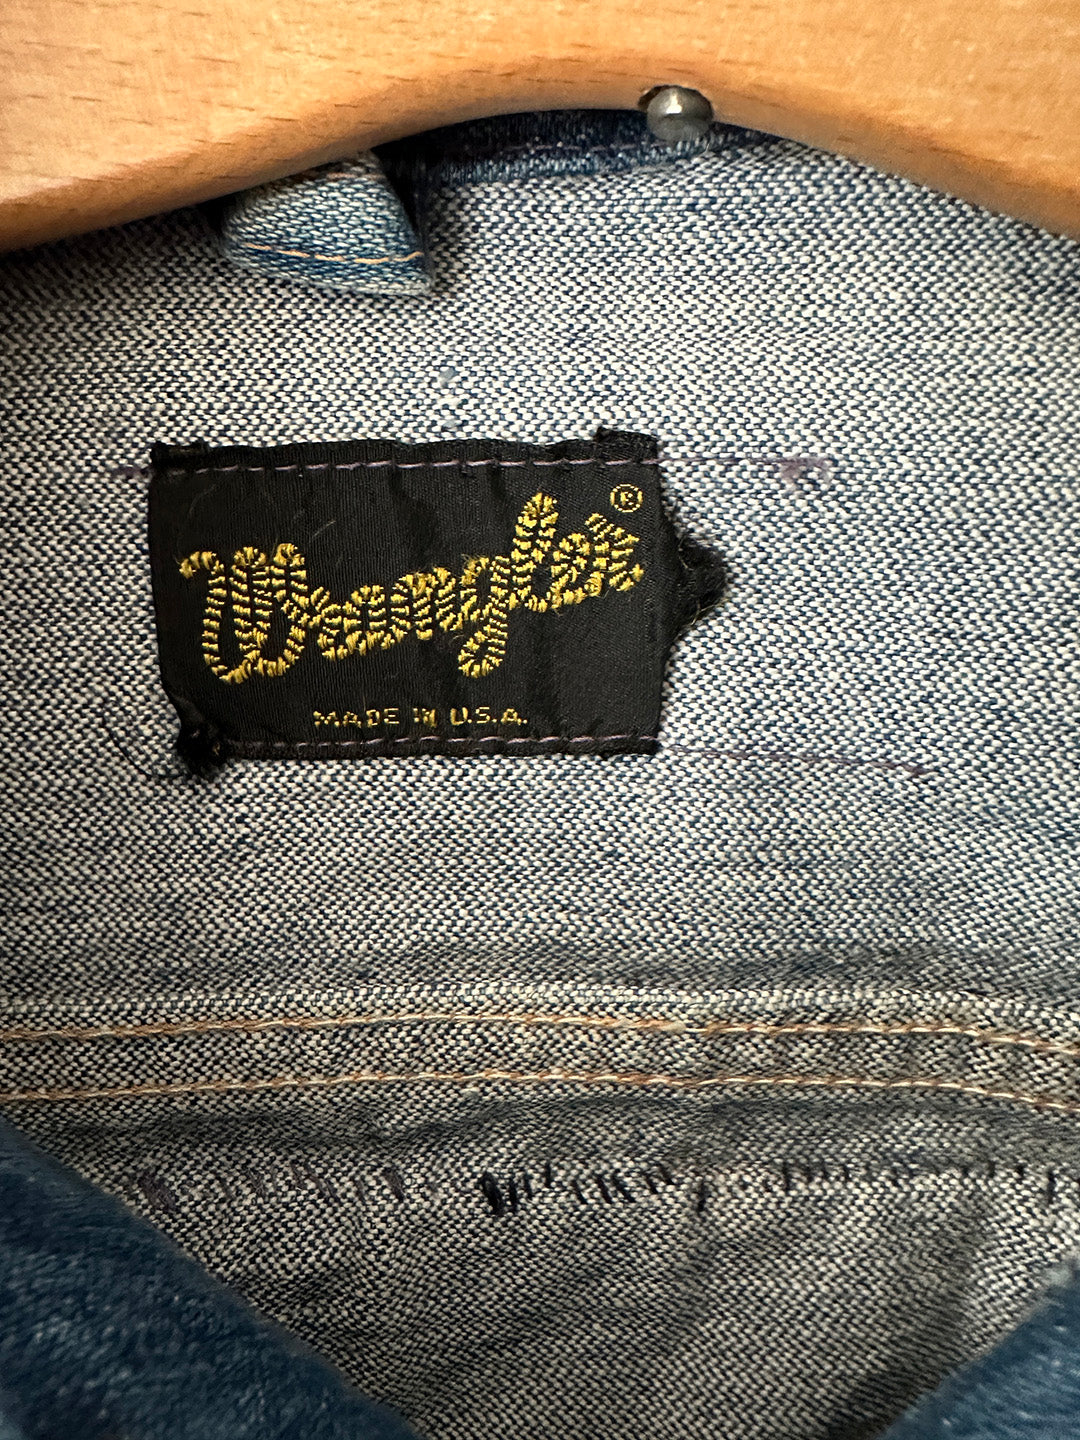 Triumph Motorcycles Denim Vest with Bicycle Patch Wrangler